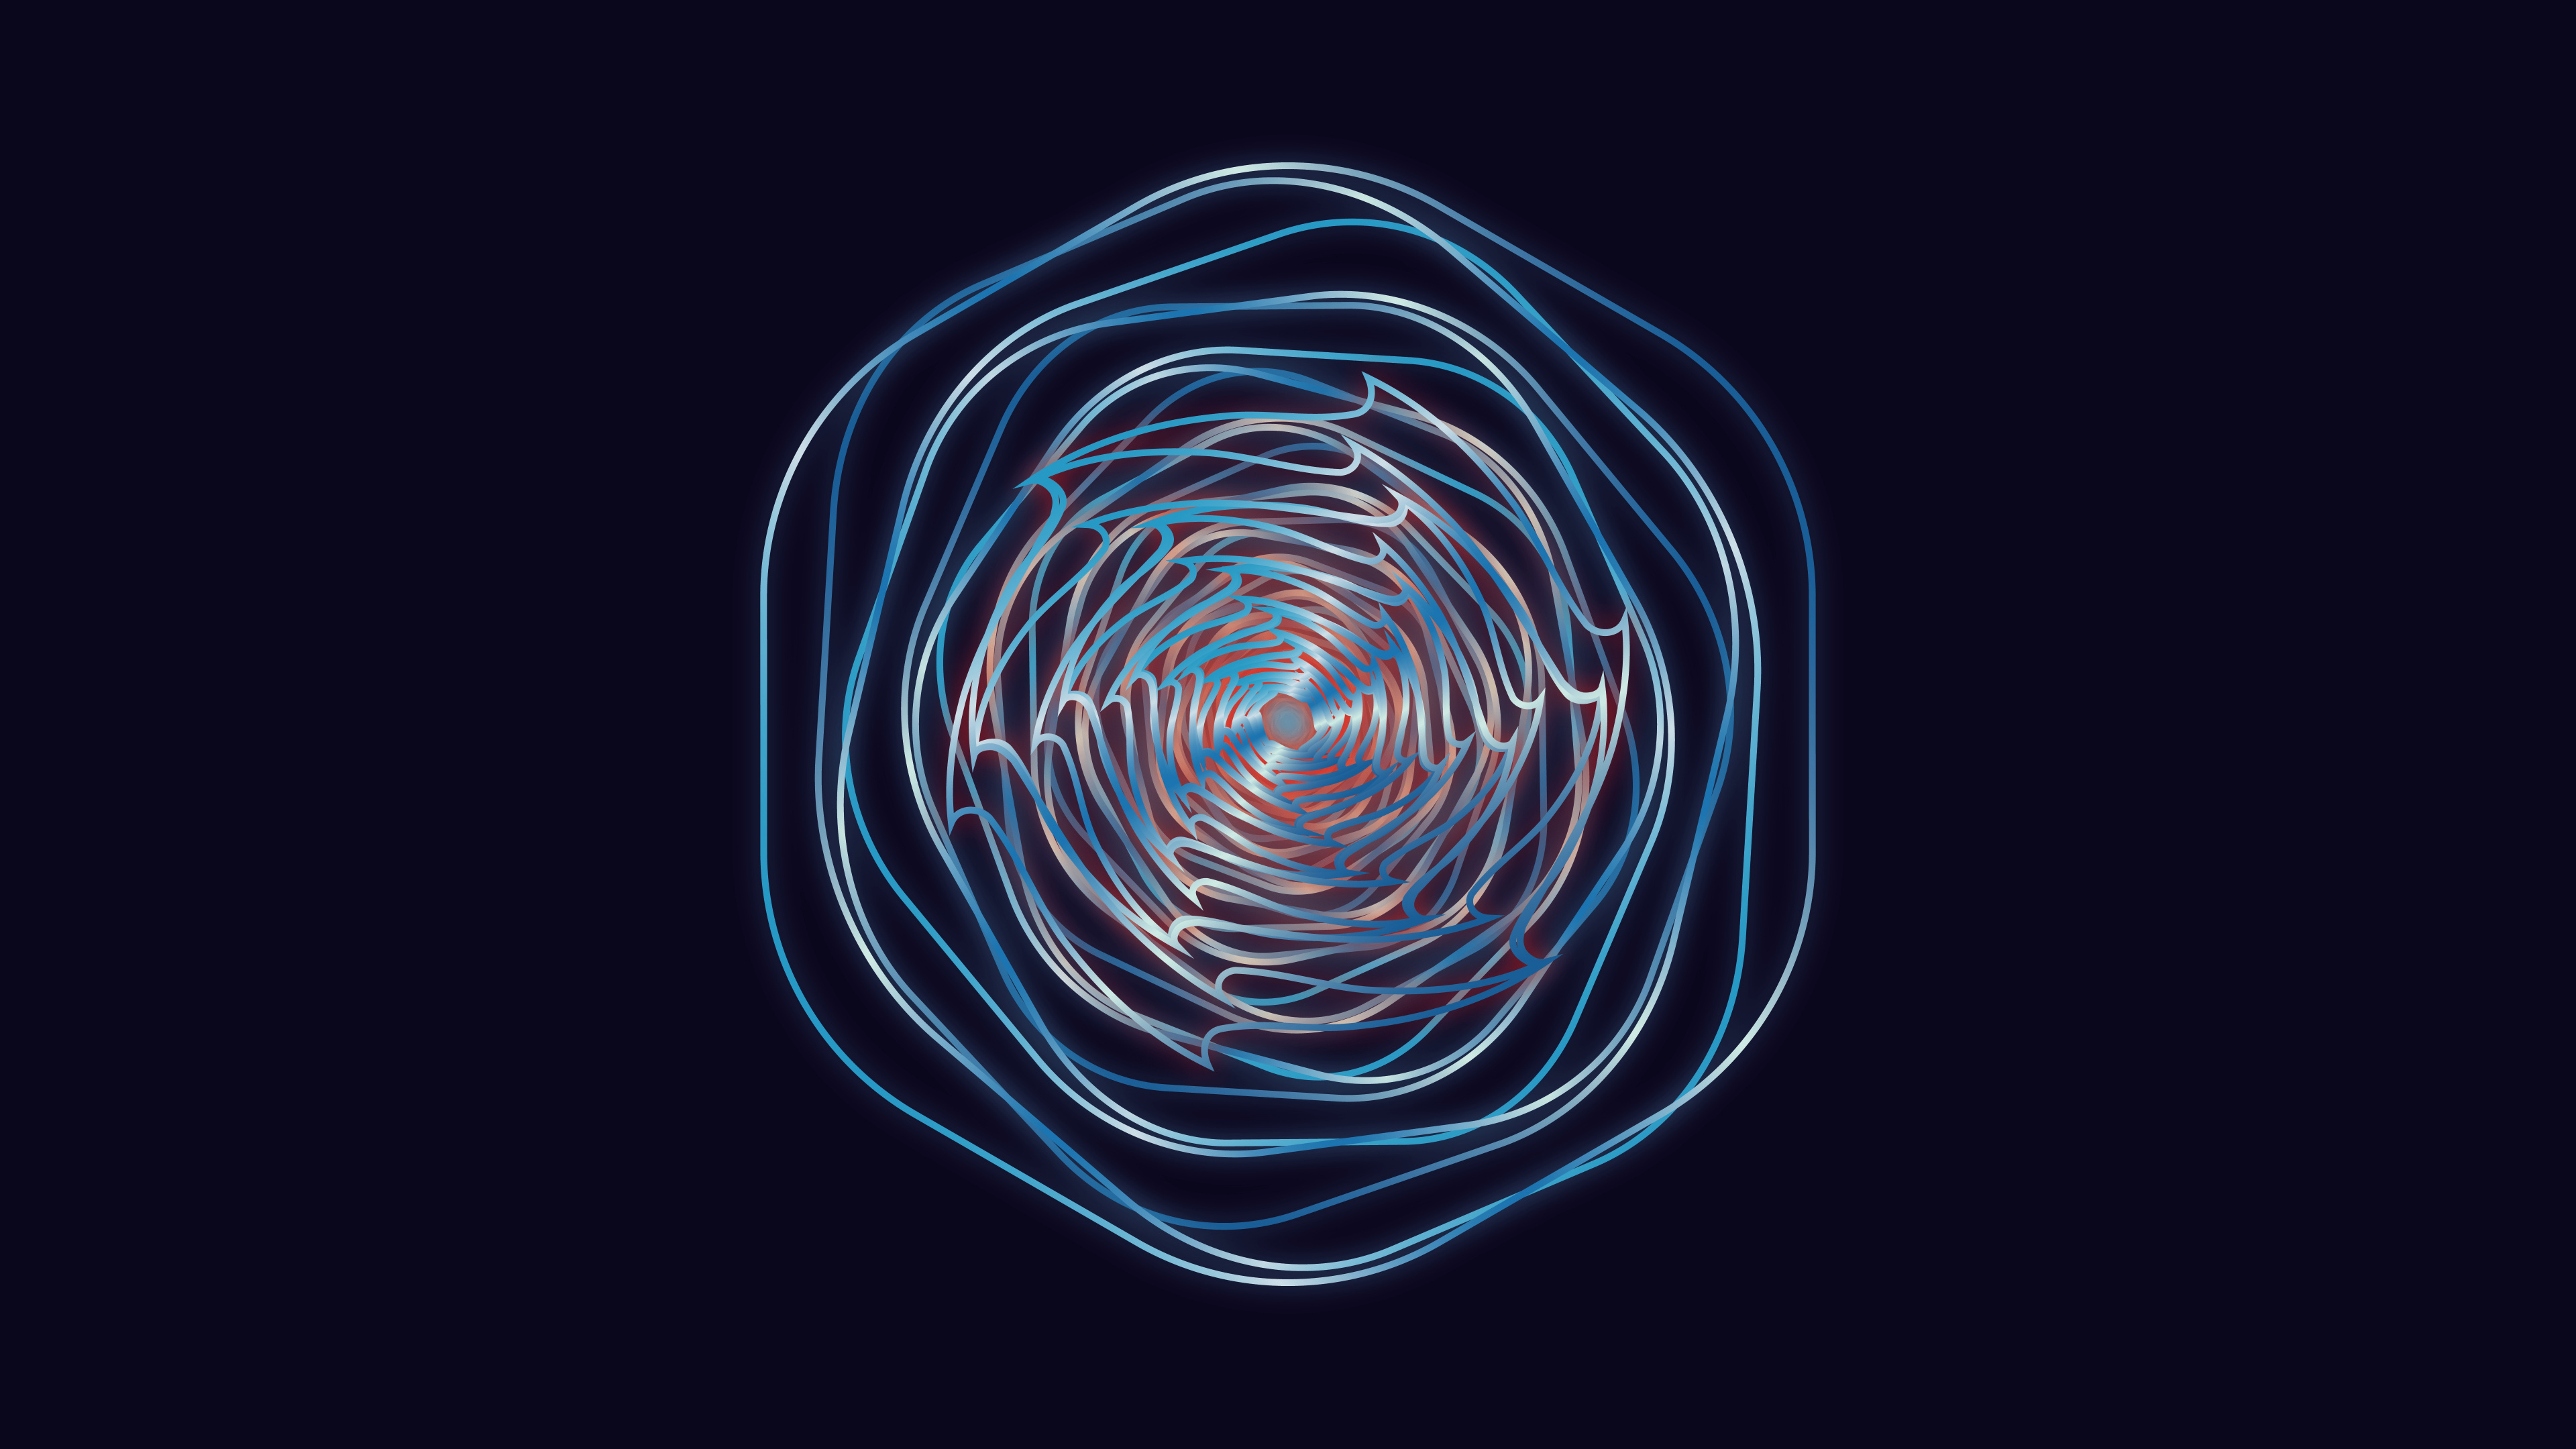 Blue and White Spiral Light. Wallpaper in 3840x2160 Resolution